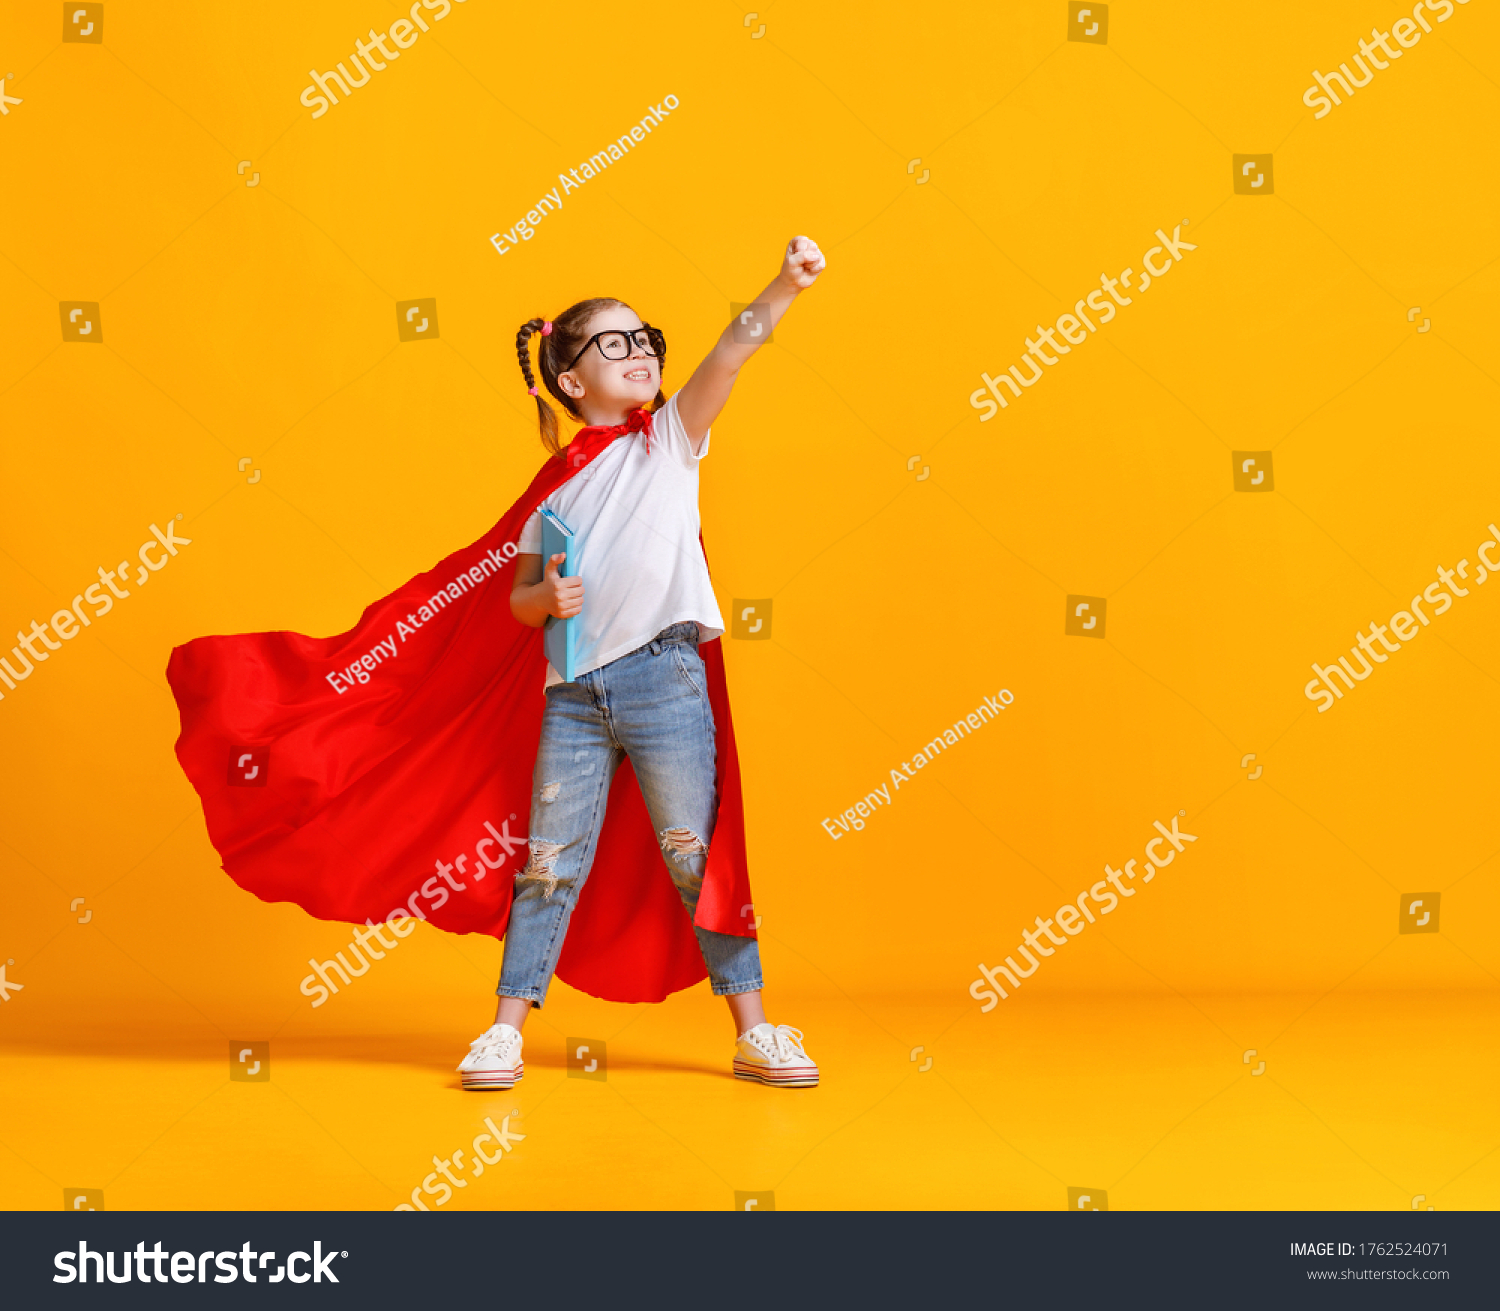 Full body girl in superhero cape smiling and raising fist up while being ready for school studies against yellow backdrop
 #1762524071